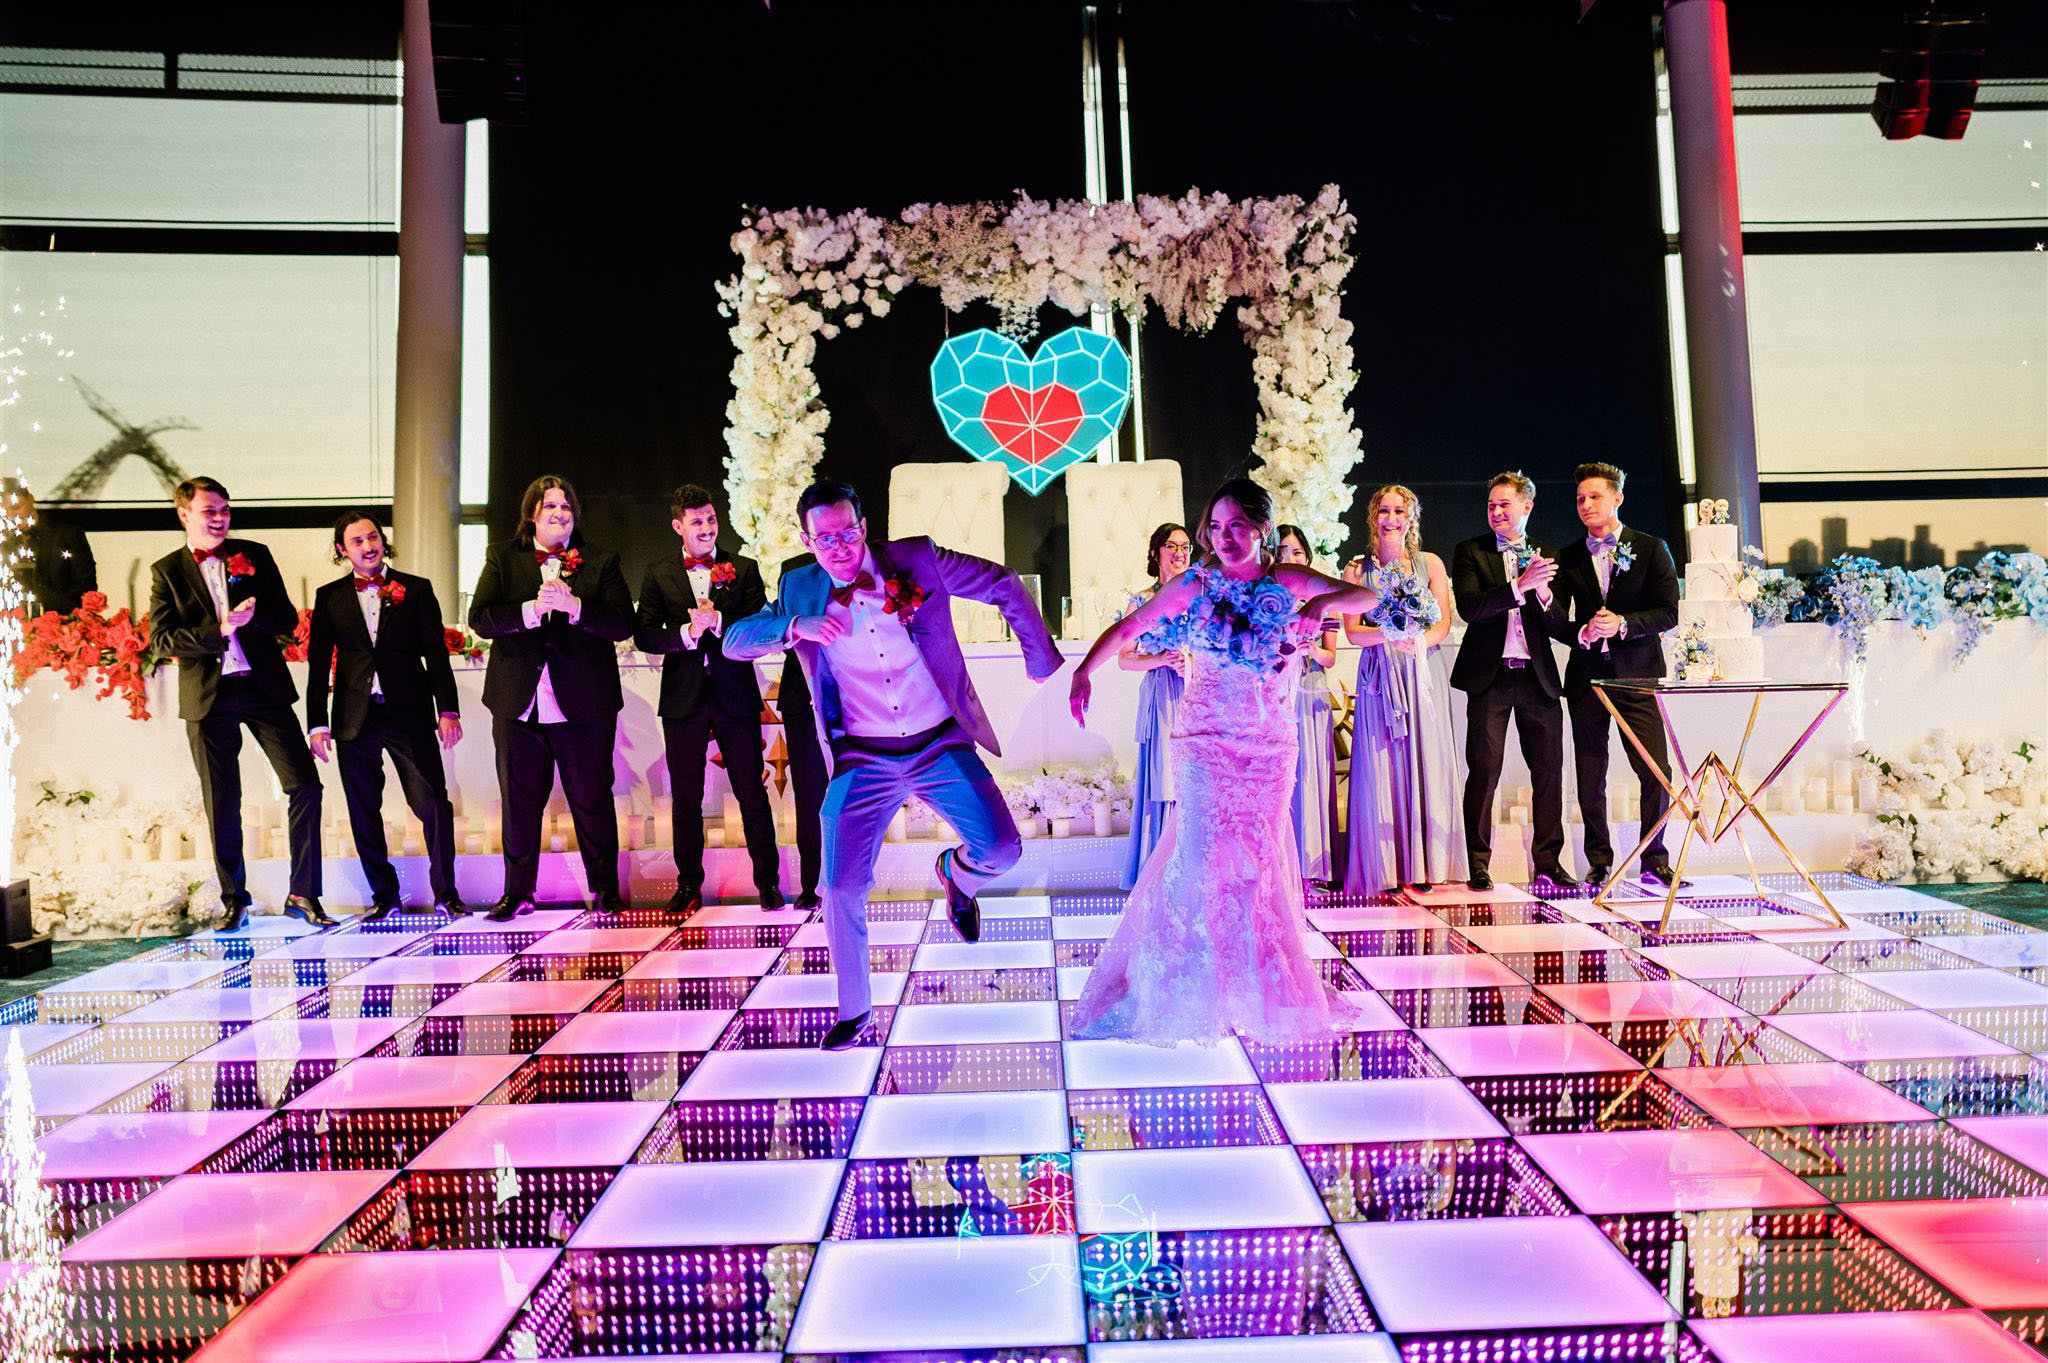 Bridal Party dancing on a LED Dance Floor at Optus Stadium